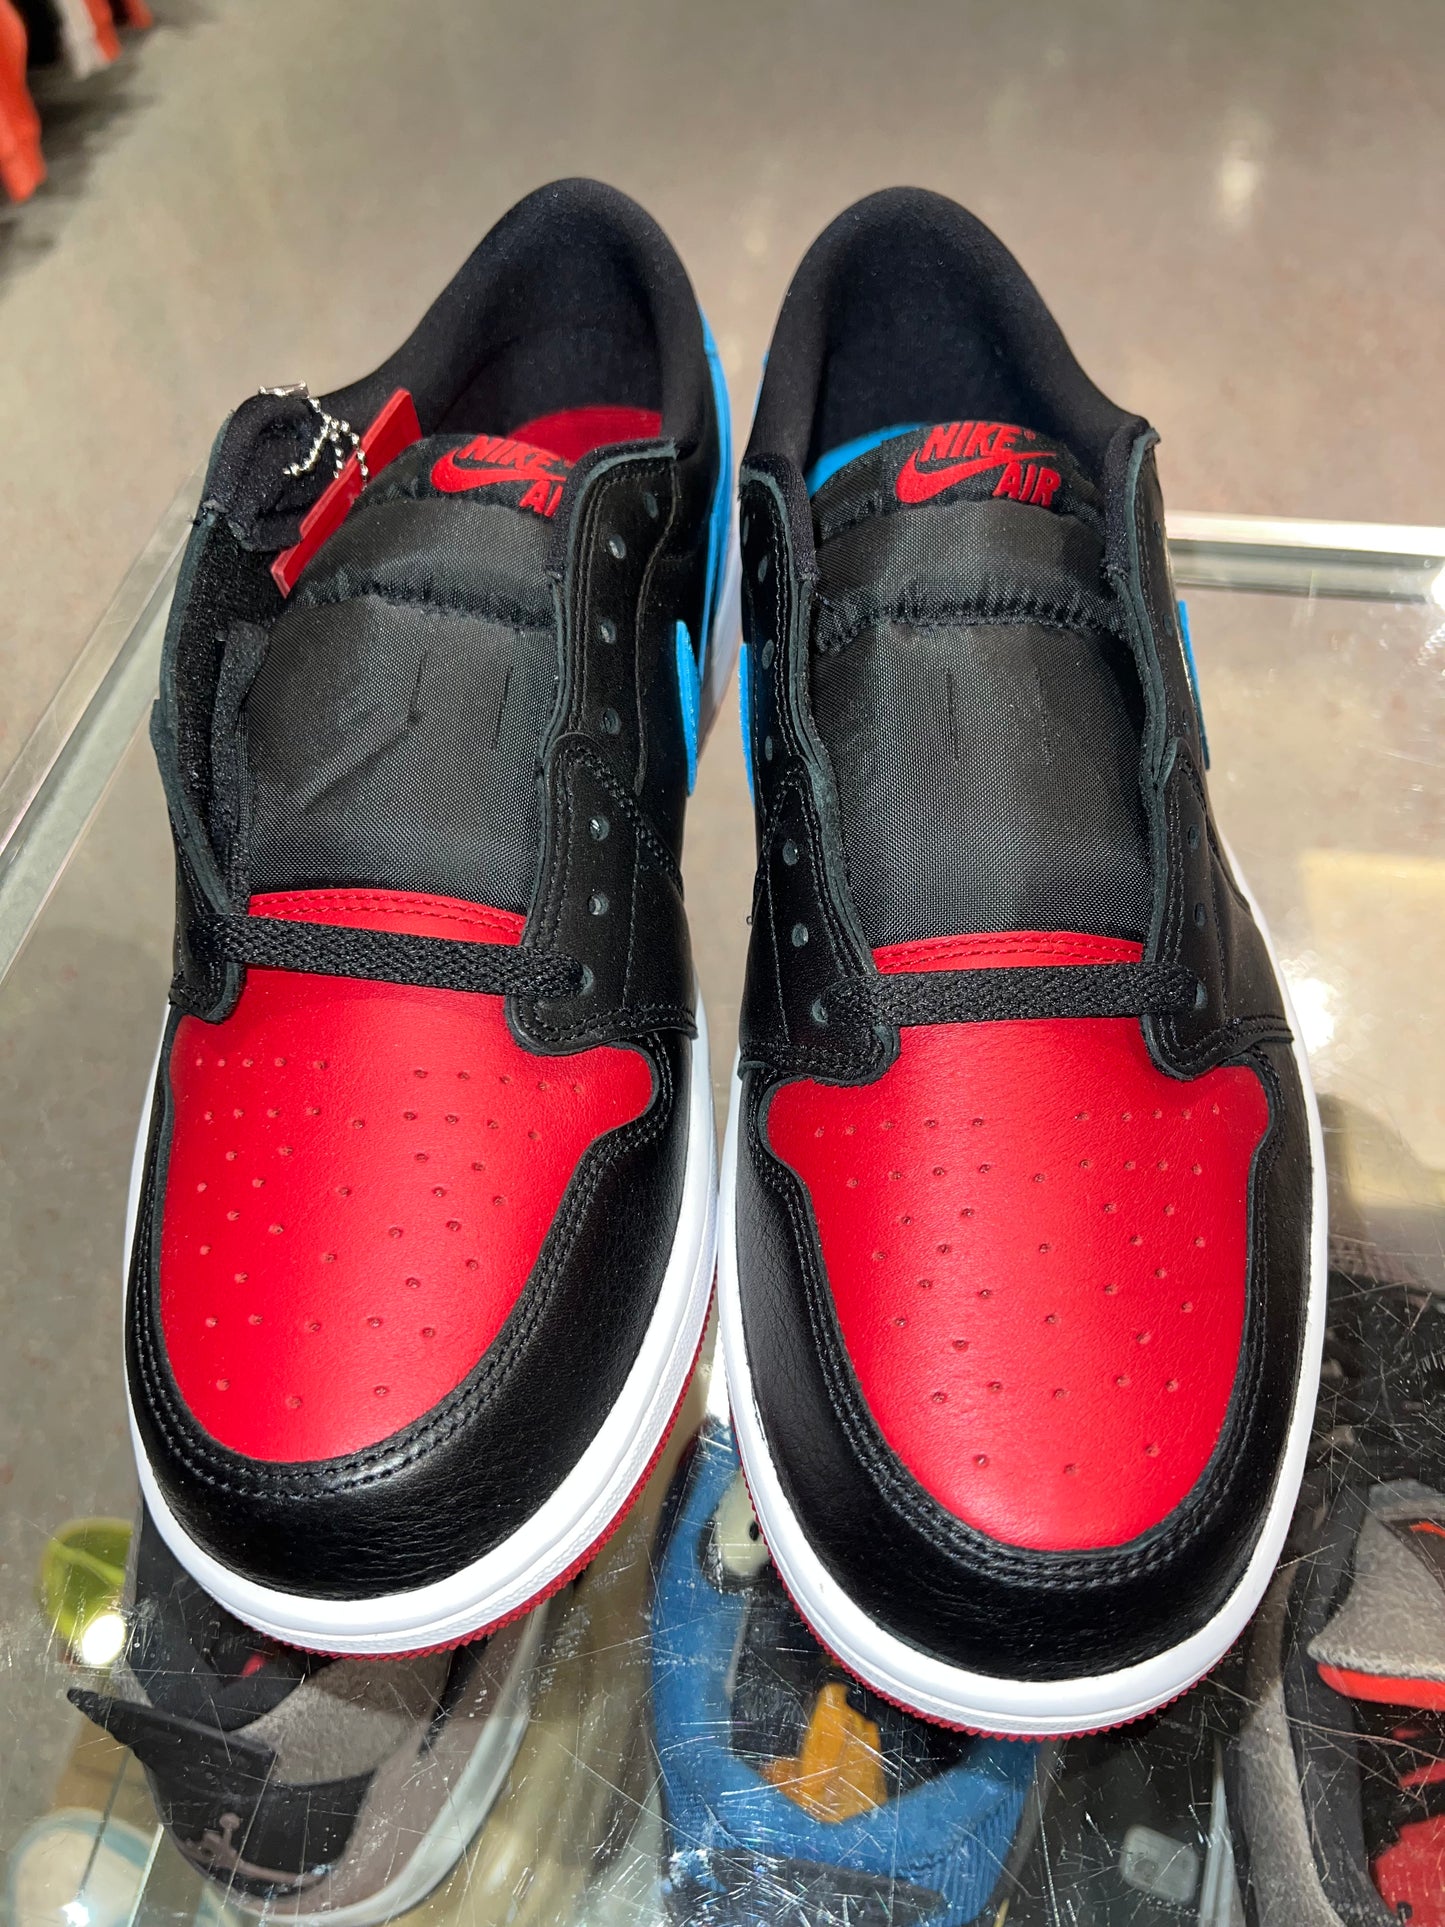 Size 10 (11.5w) Air Jordan 1 Low “NC To CHI” Brand New (Mall)